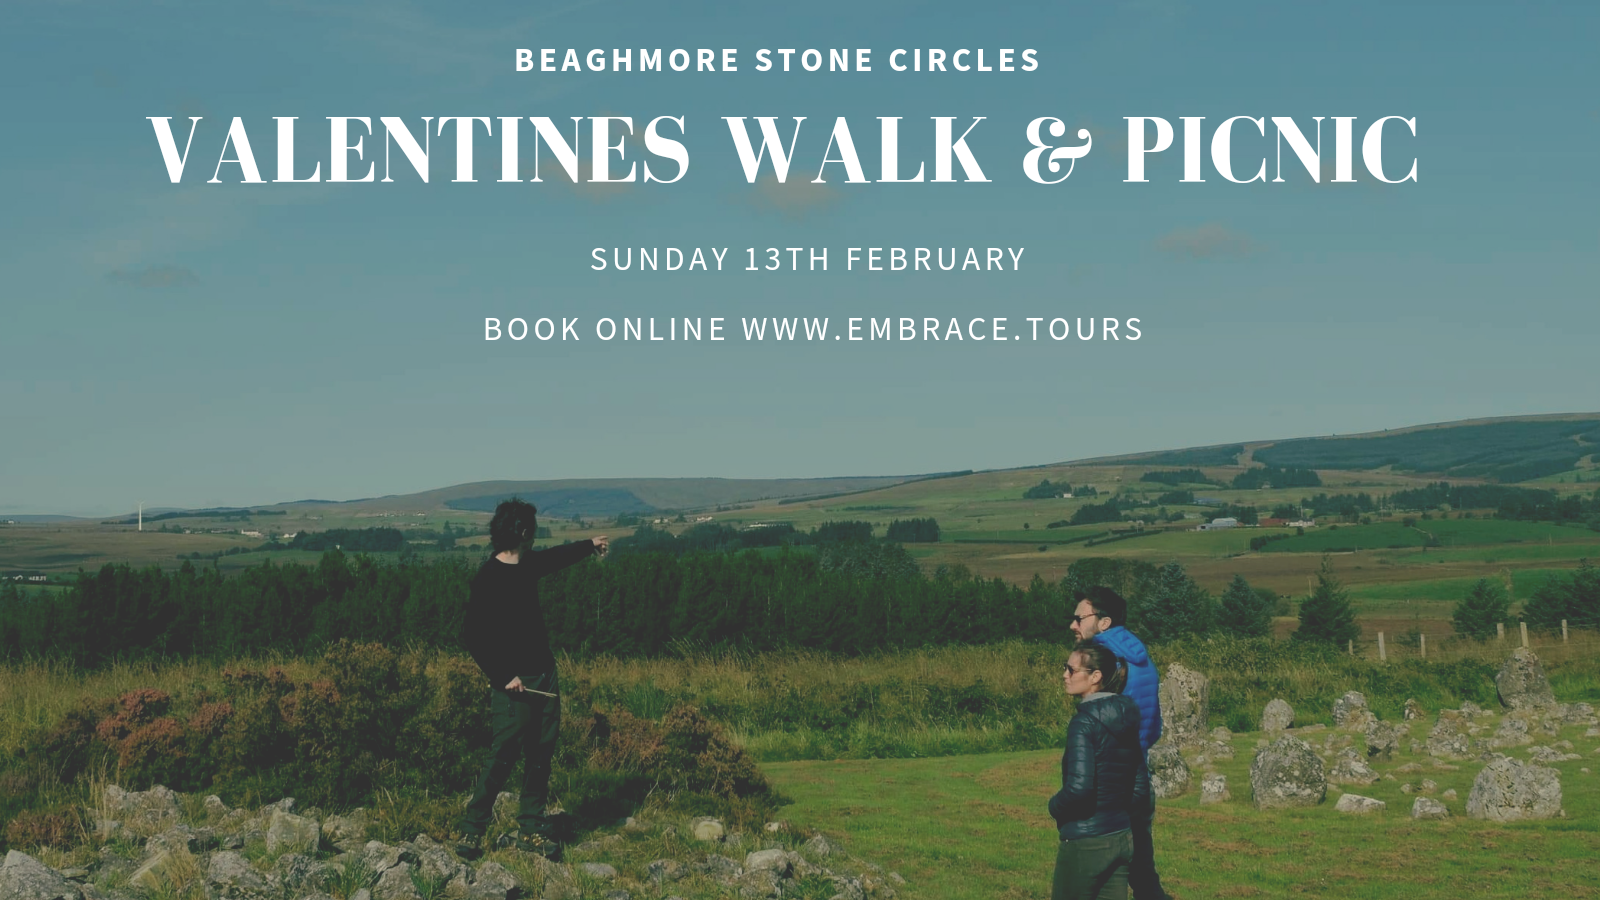 Beaghmore stone circles valentines experience